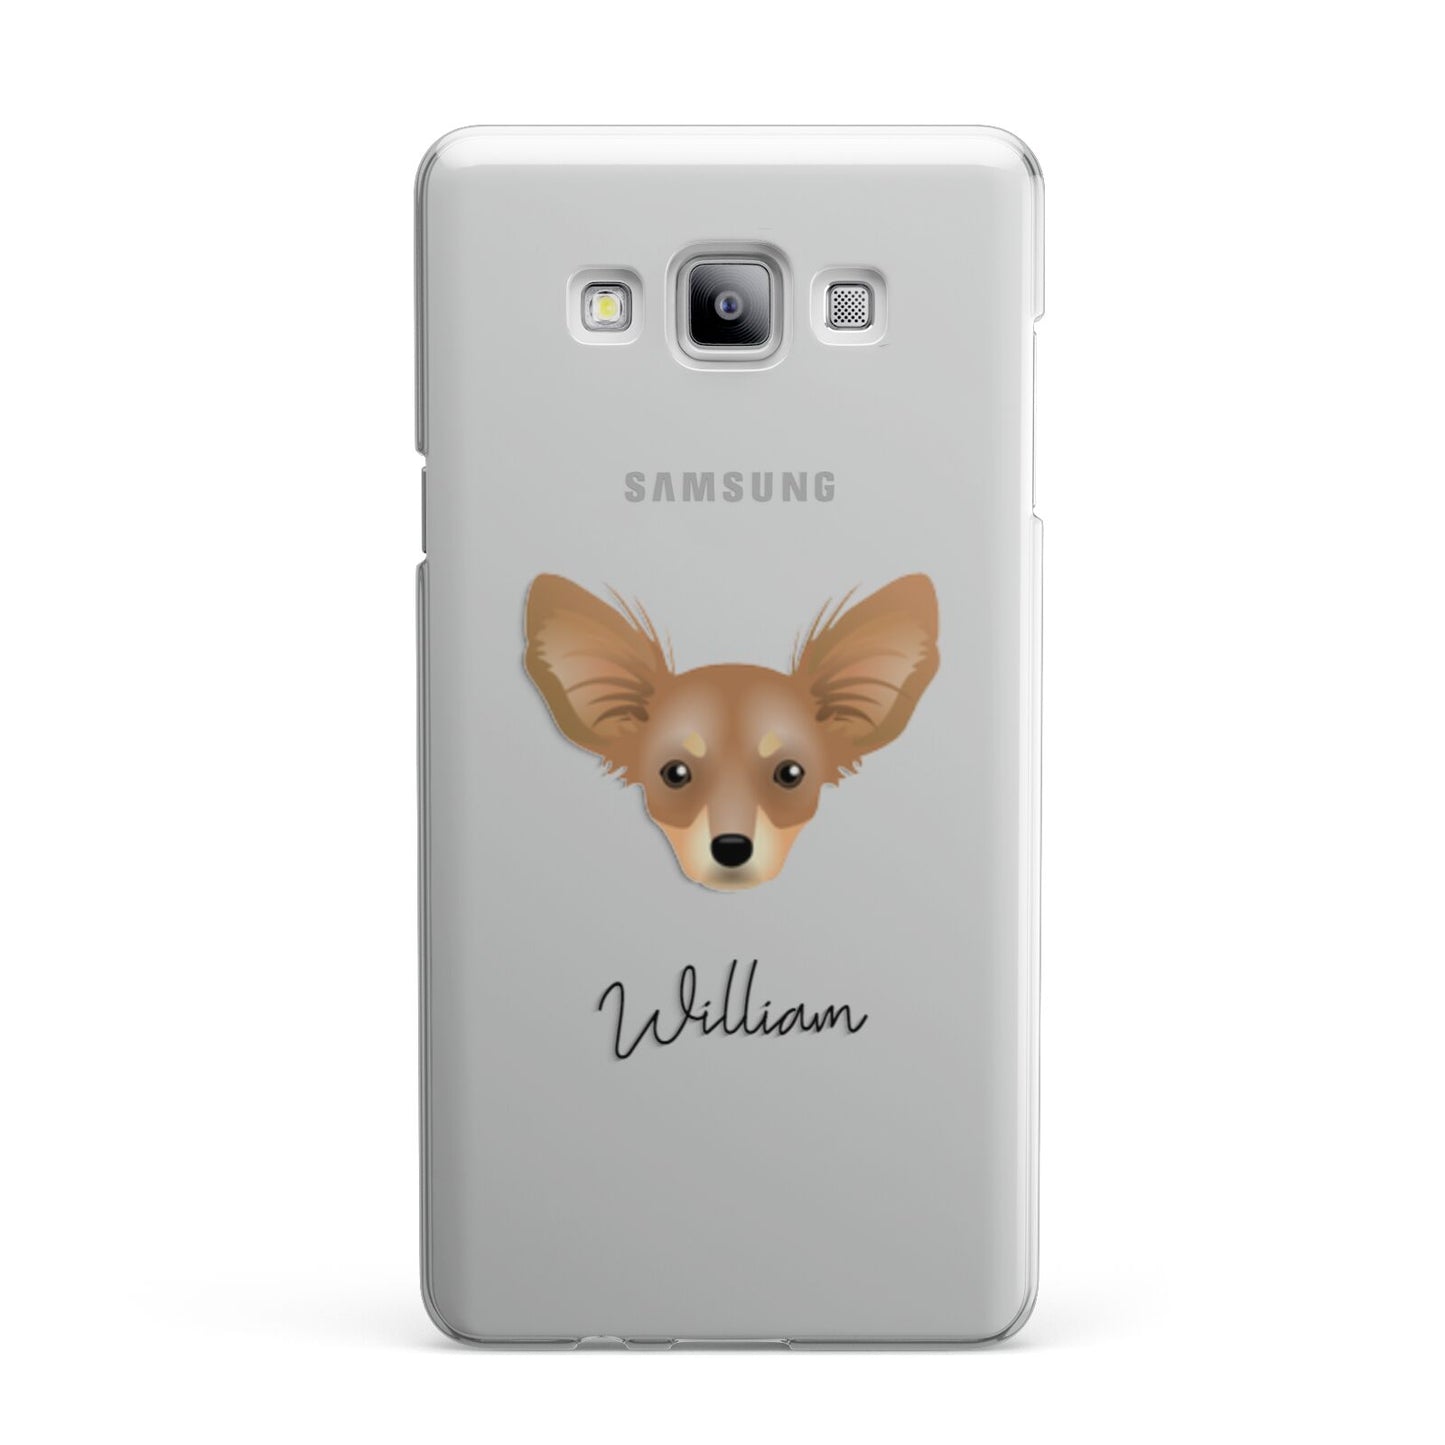 Russian Toy Personalised Samsung Galaxy A7 2015 Case